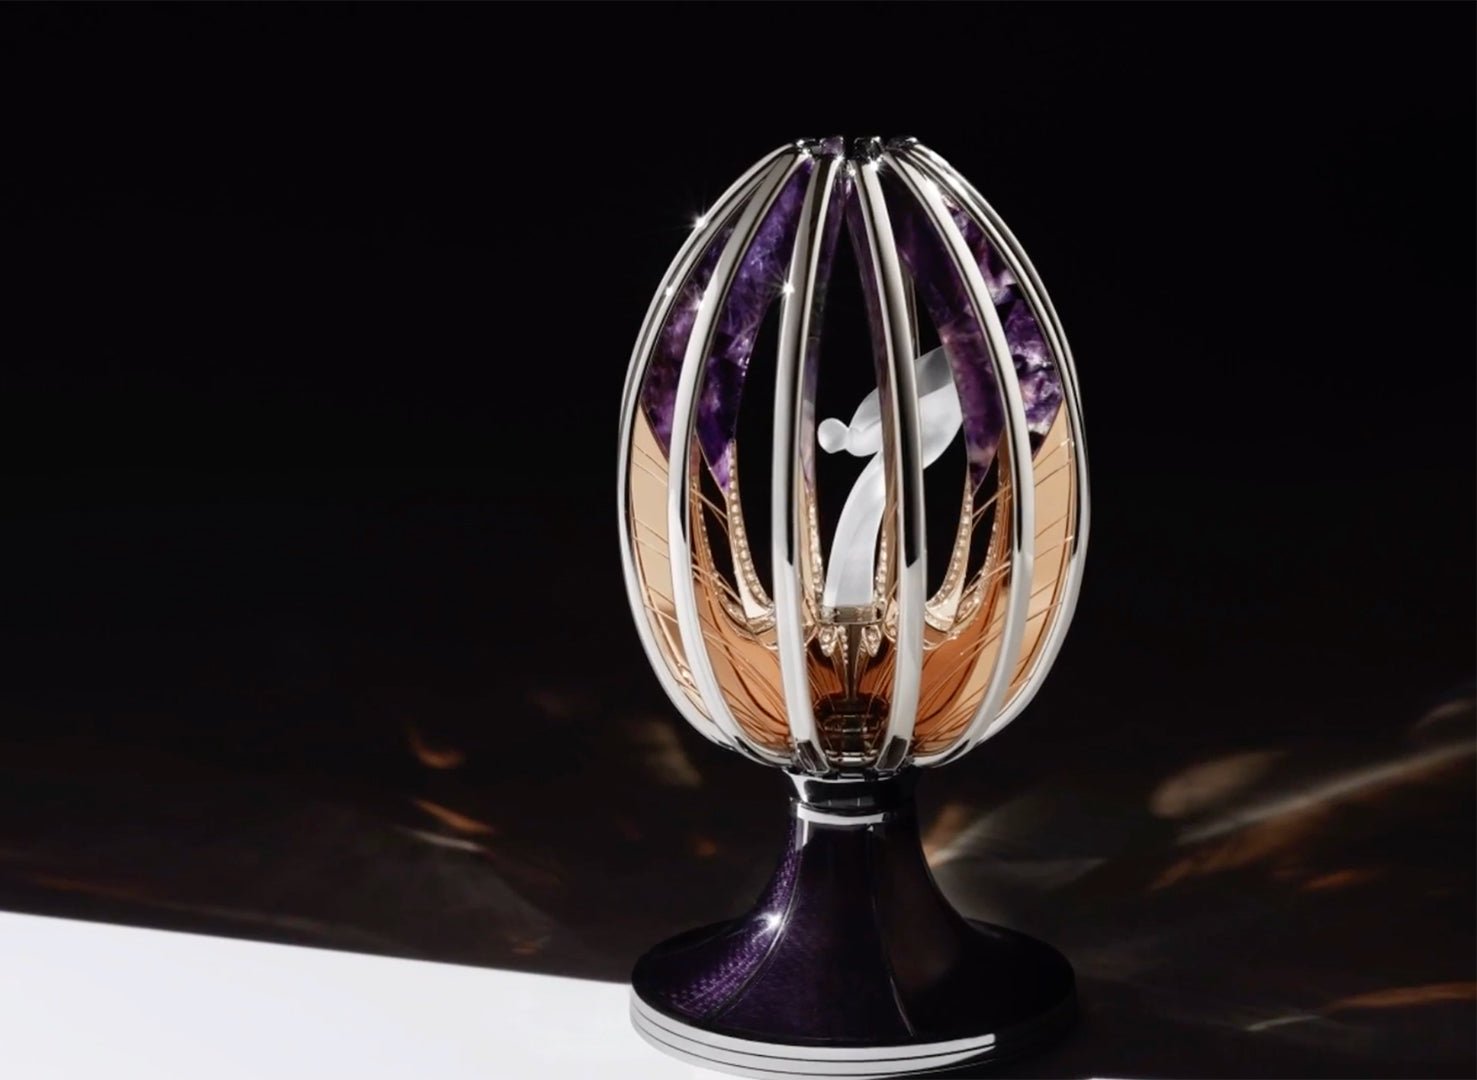 Rolls-Royce and Fabergé Created the Most Spectacular Fabergé Egg - DSF Antique Jewelry